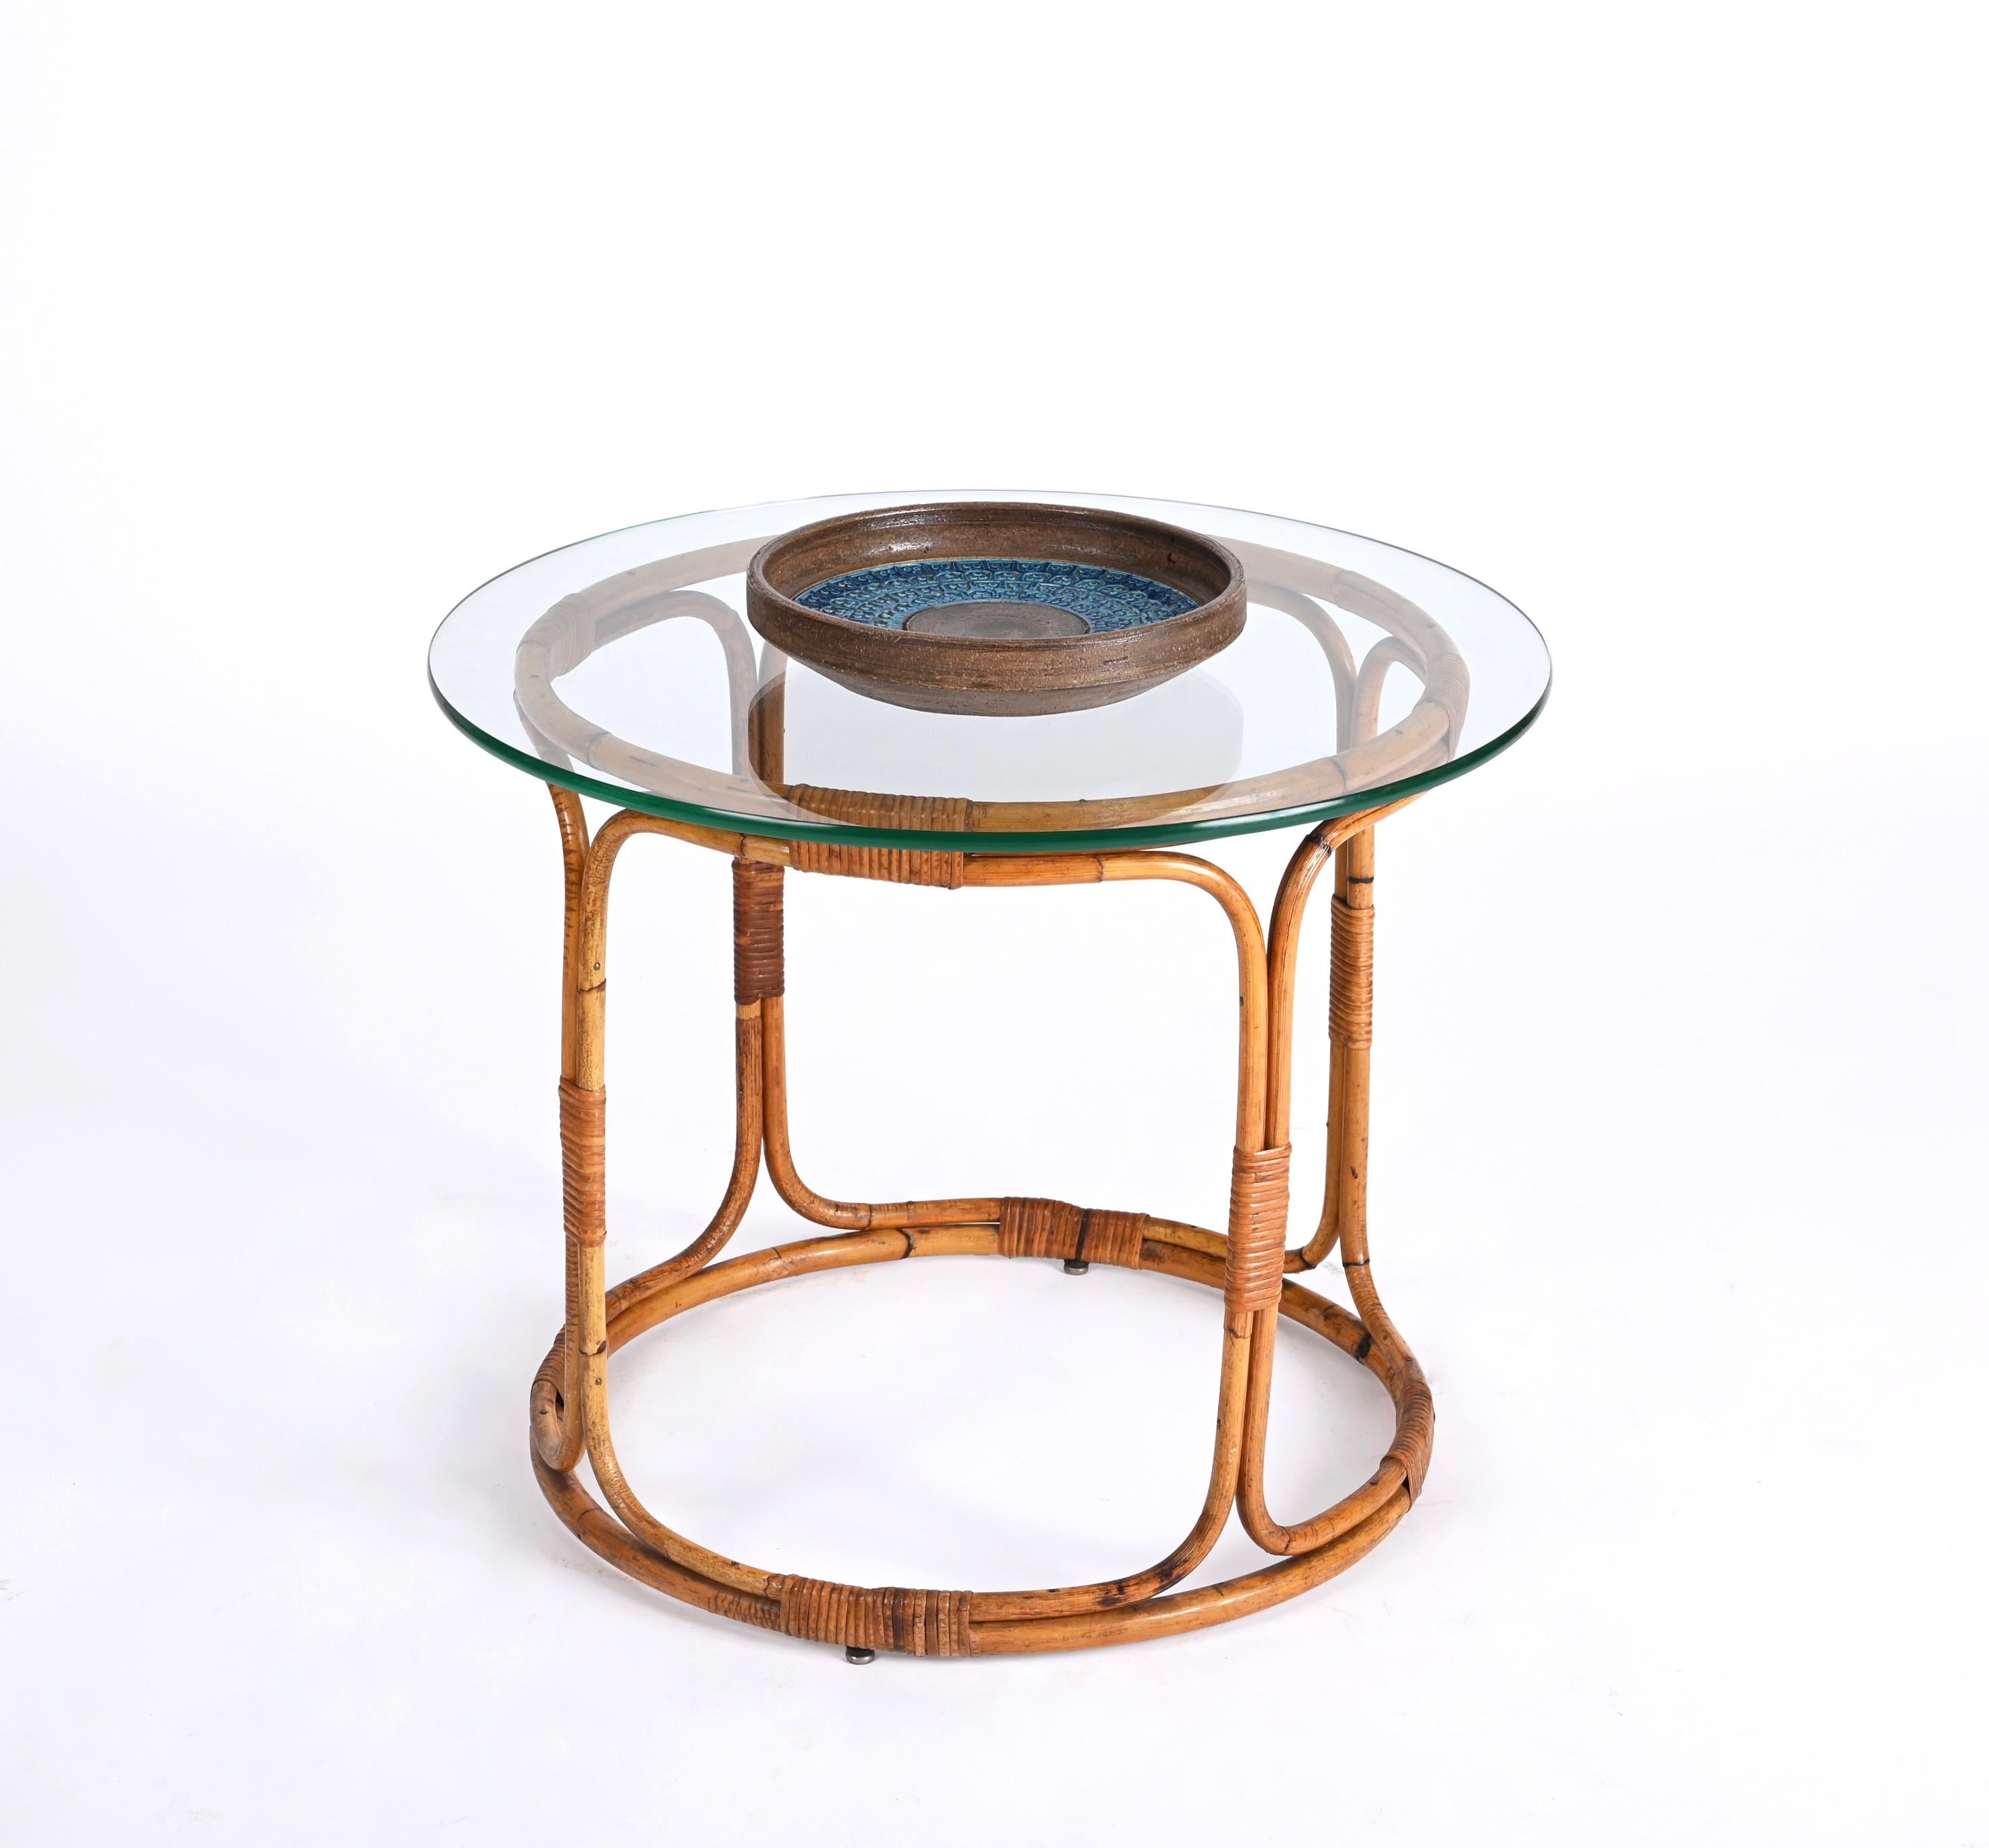 Midcentury Round Rattan, Bamboo Italian Coffee Table with Glass Shelf, 1960s For Sale 6